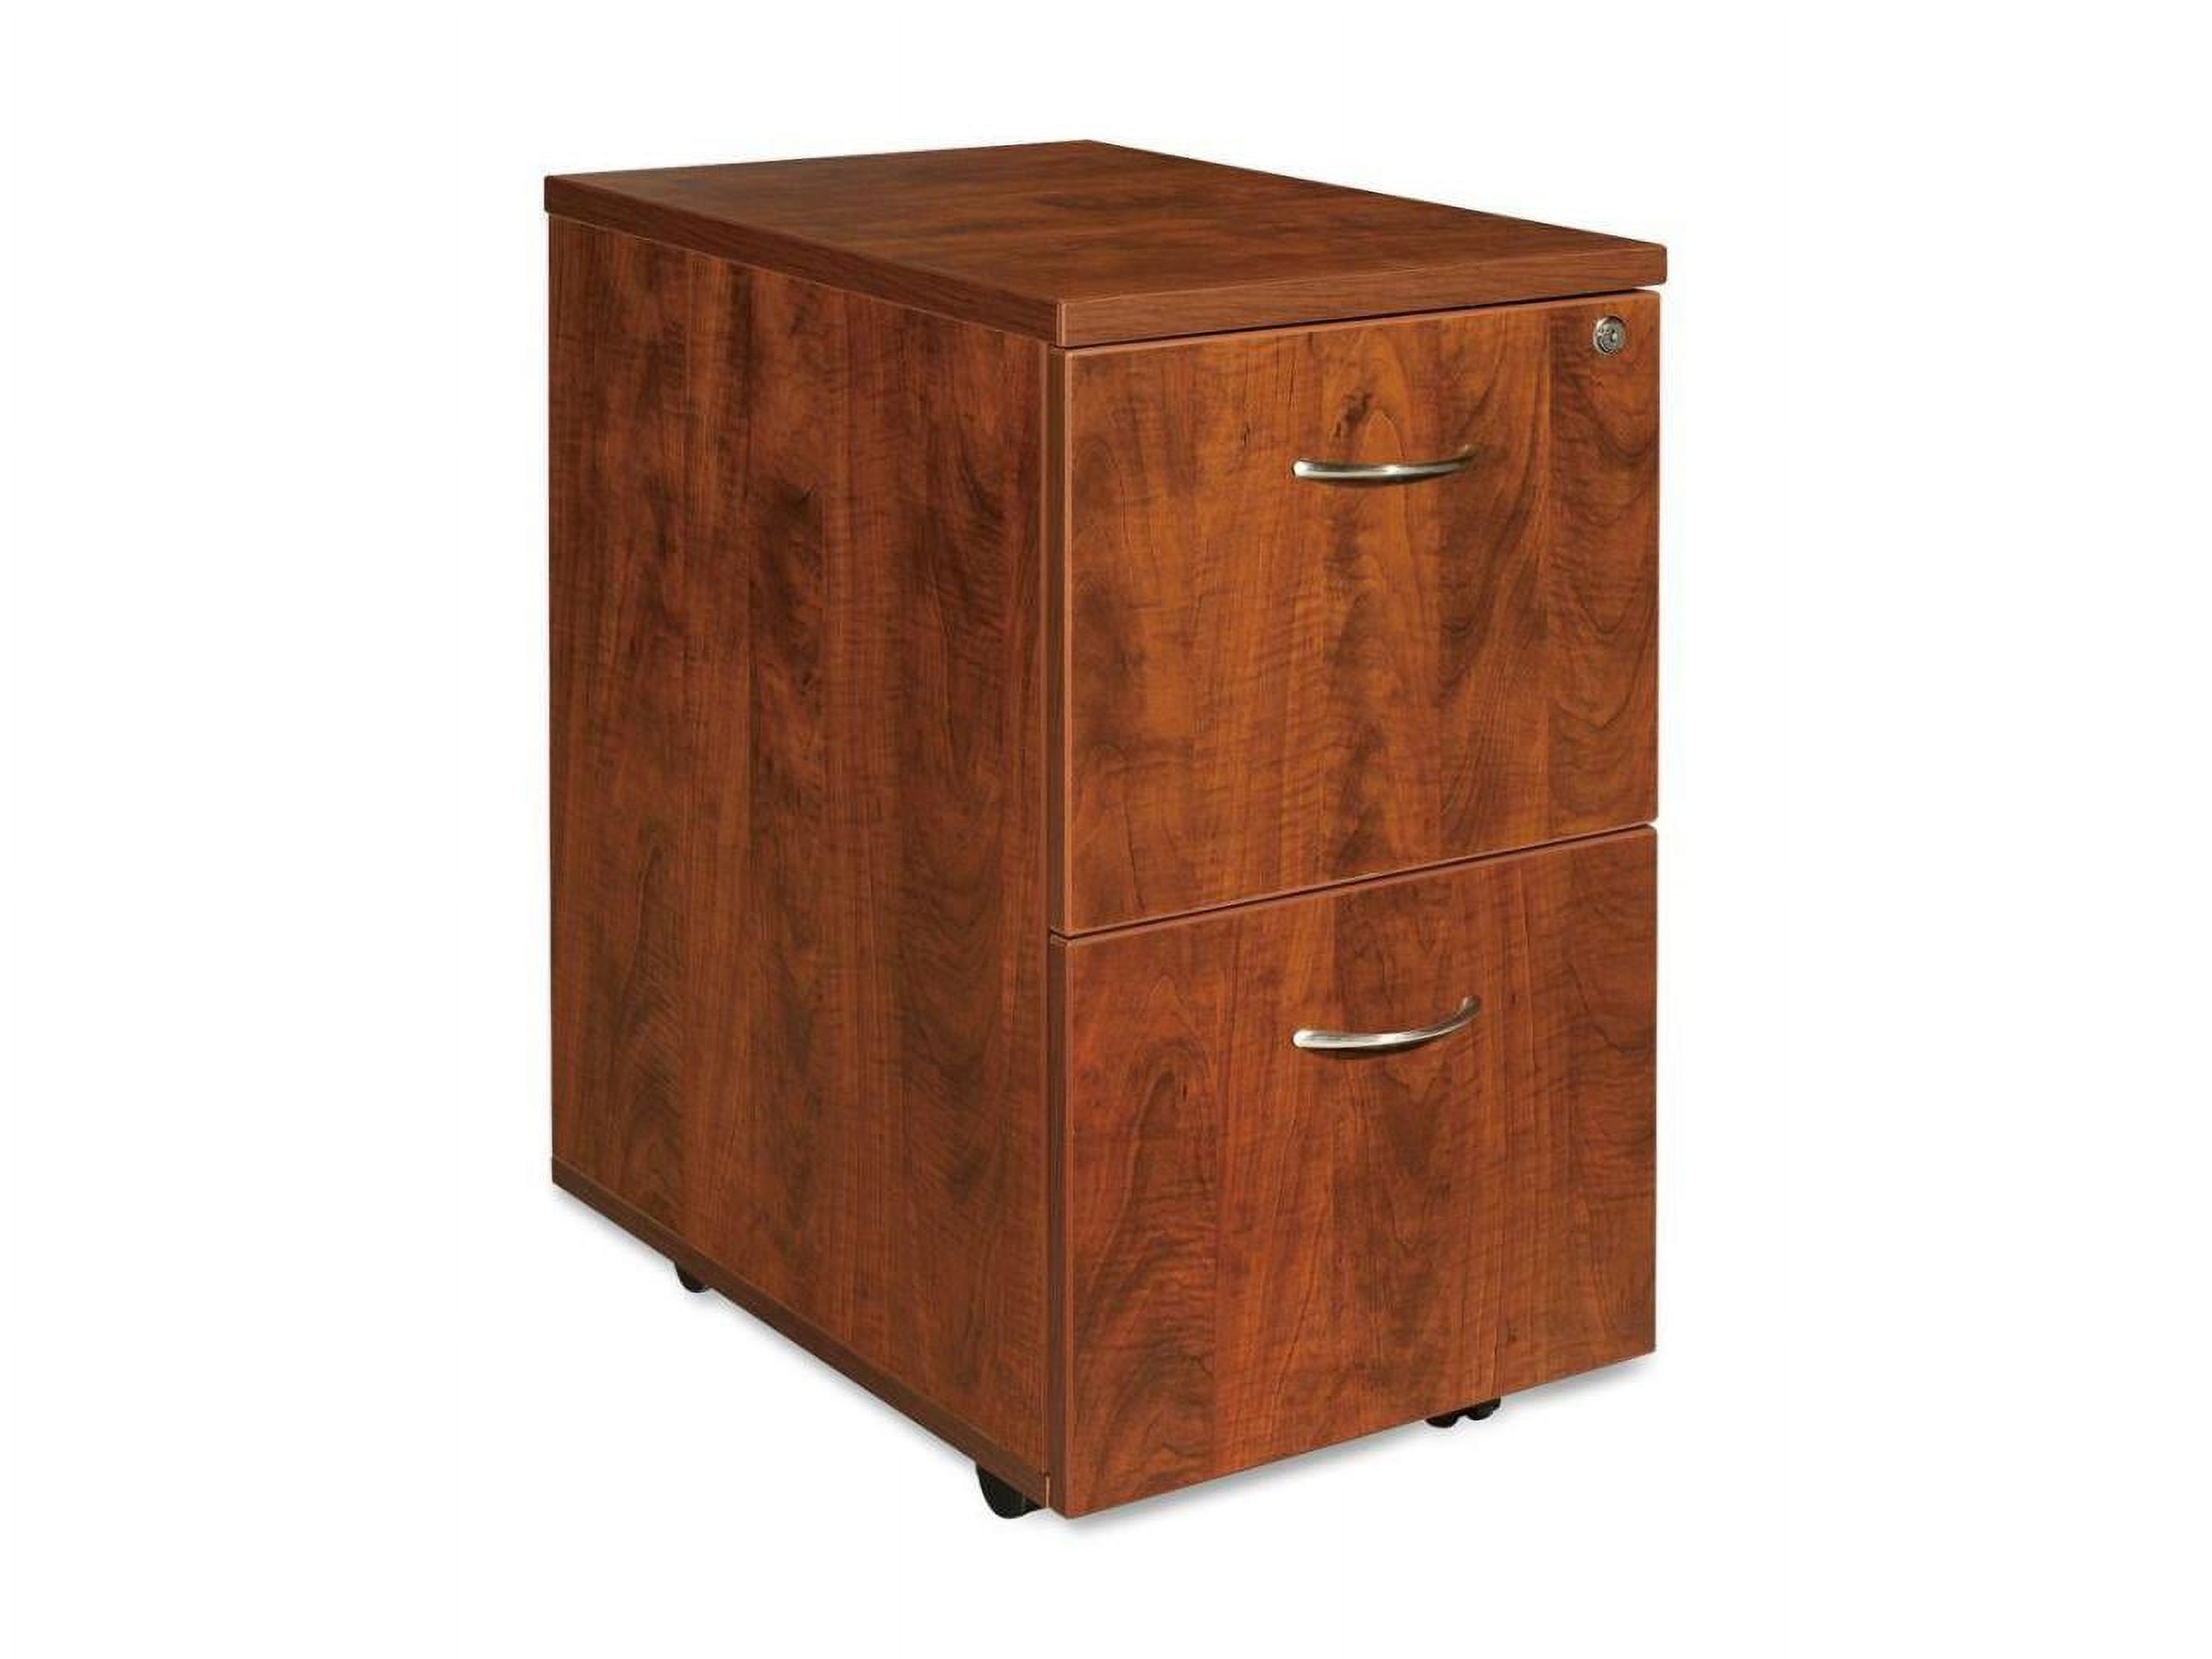 2 Drawers Vertical Wood Composite Lockable Filing Cabinet, Cherry, Letter-Size - image 4 of 14